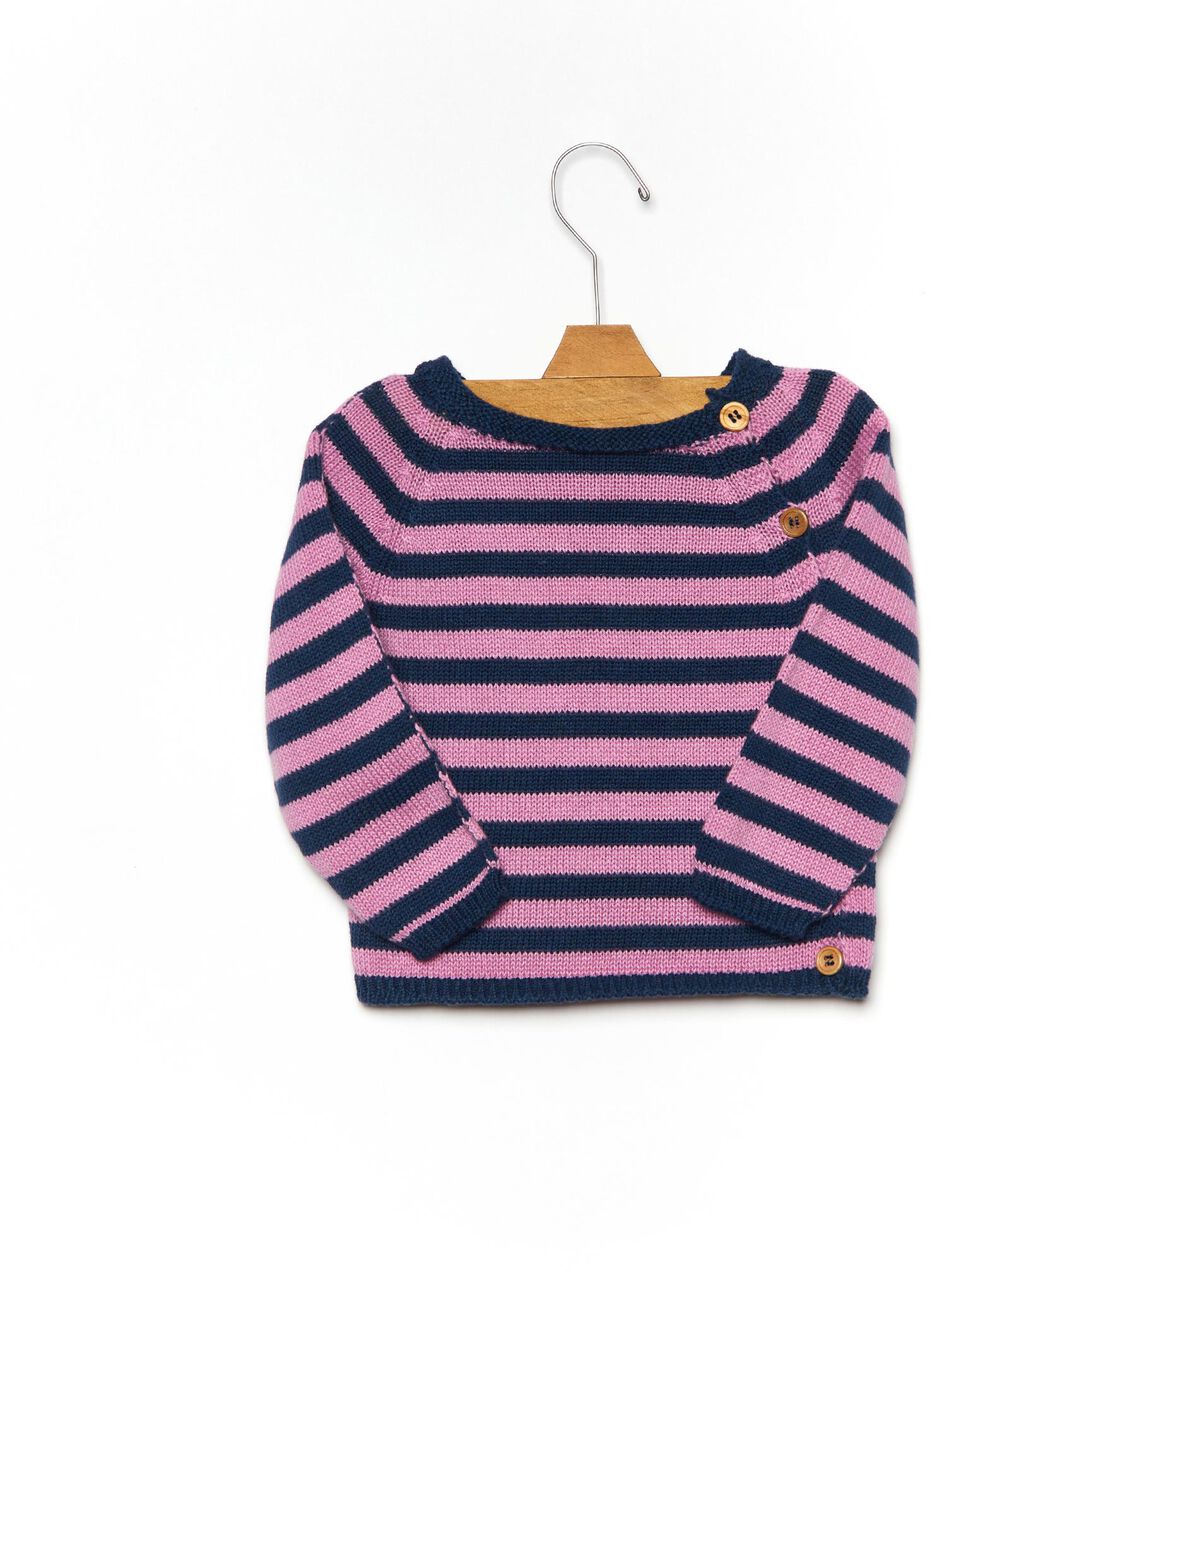 Blue/Pink striped jumper with buttons - Knitwear - Nícoli